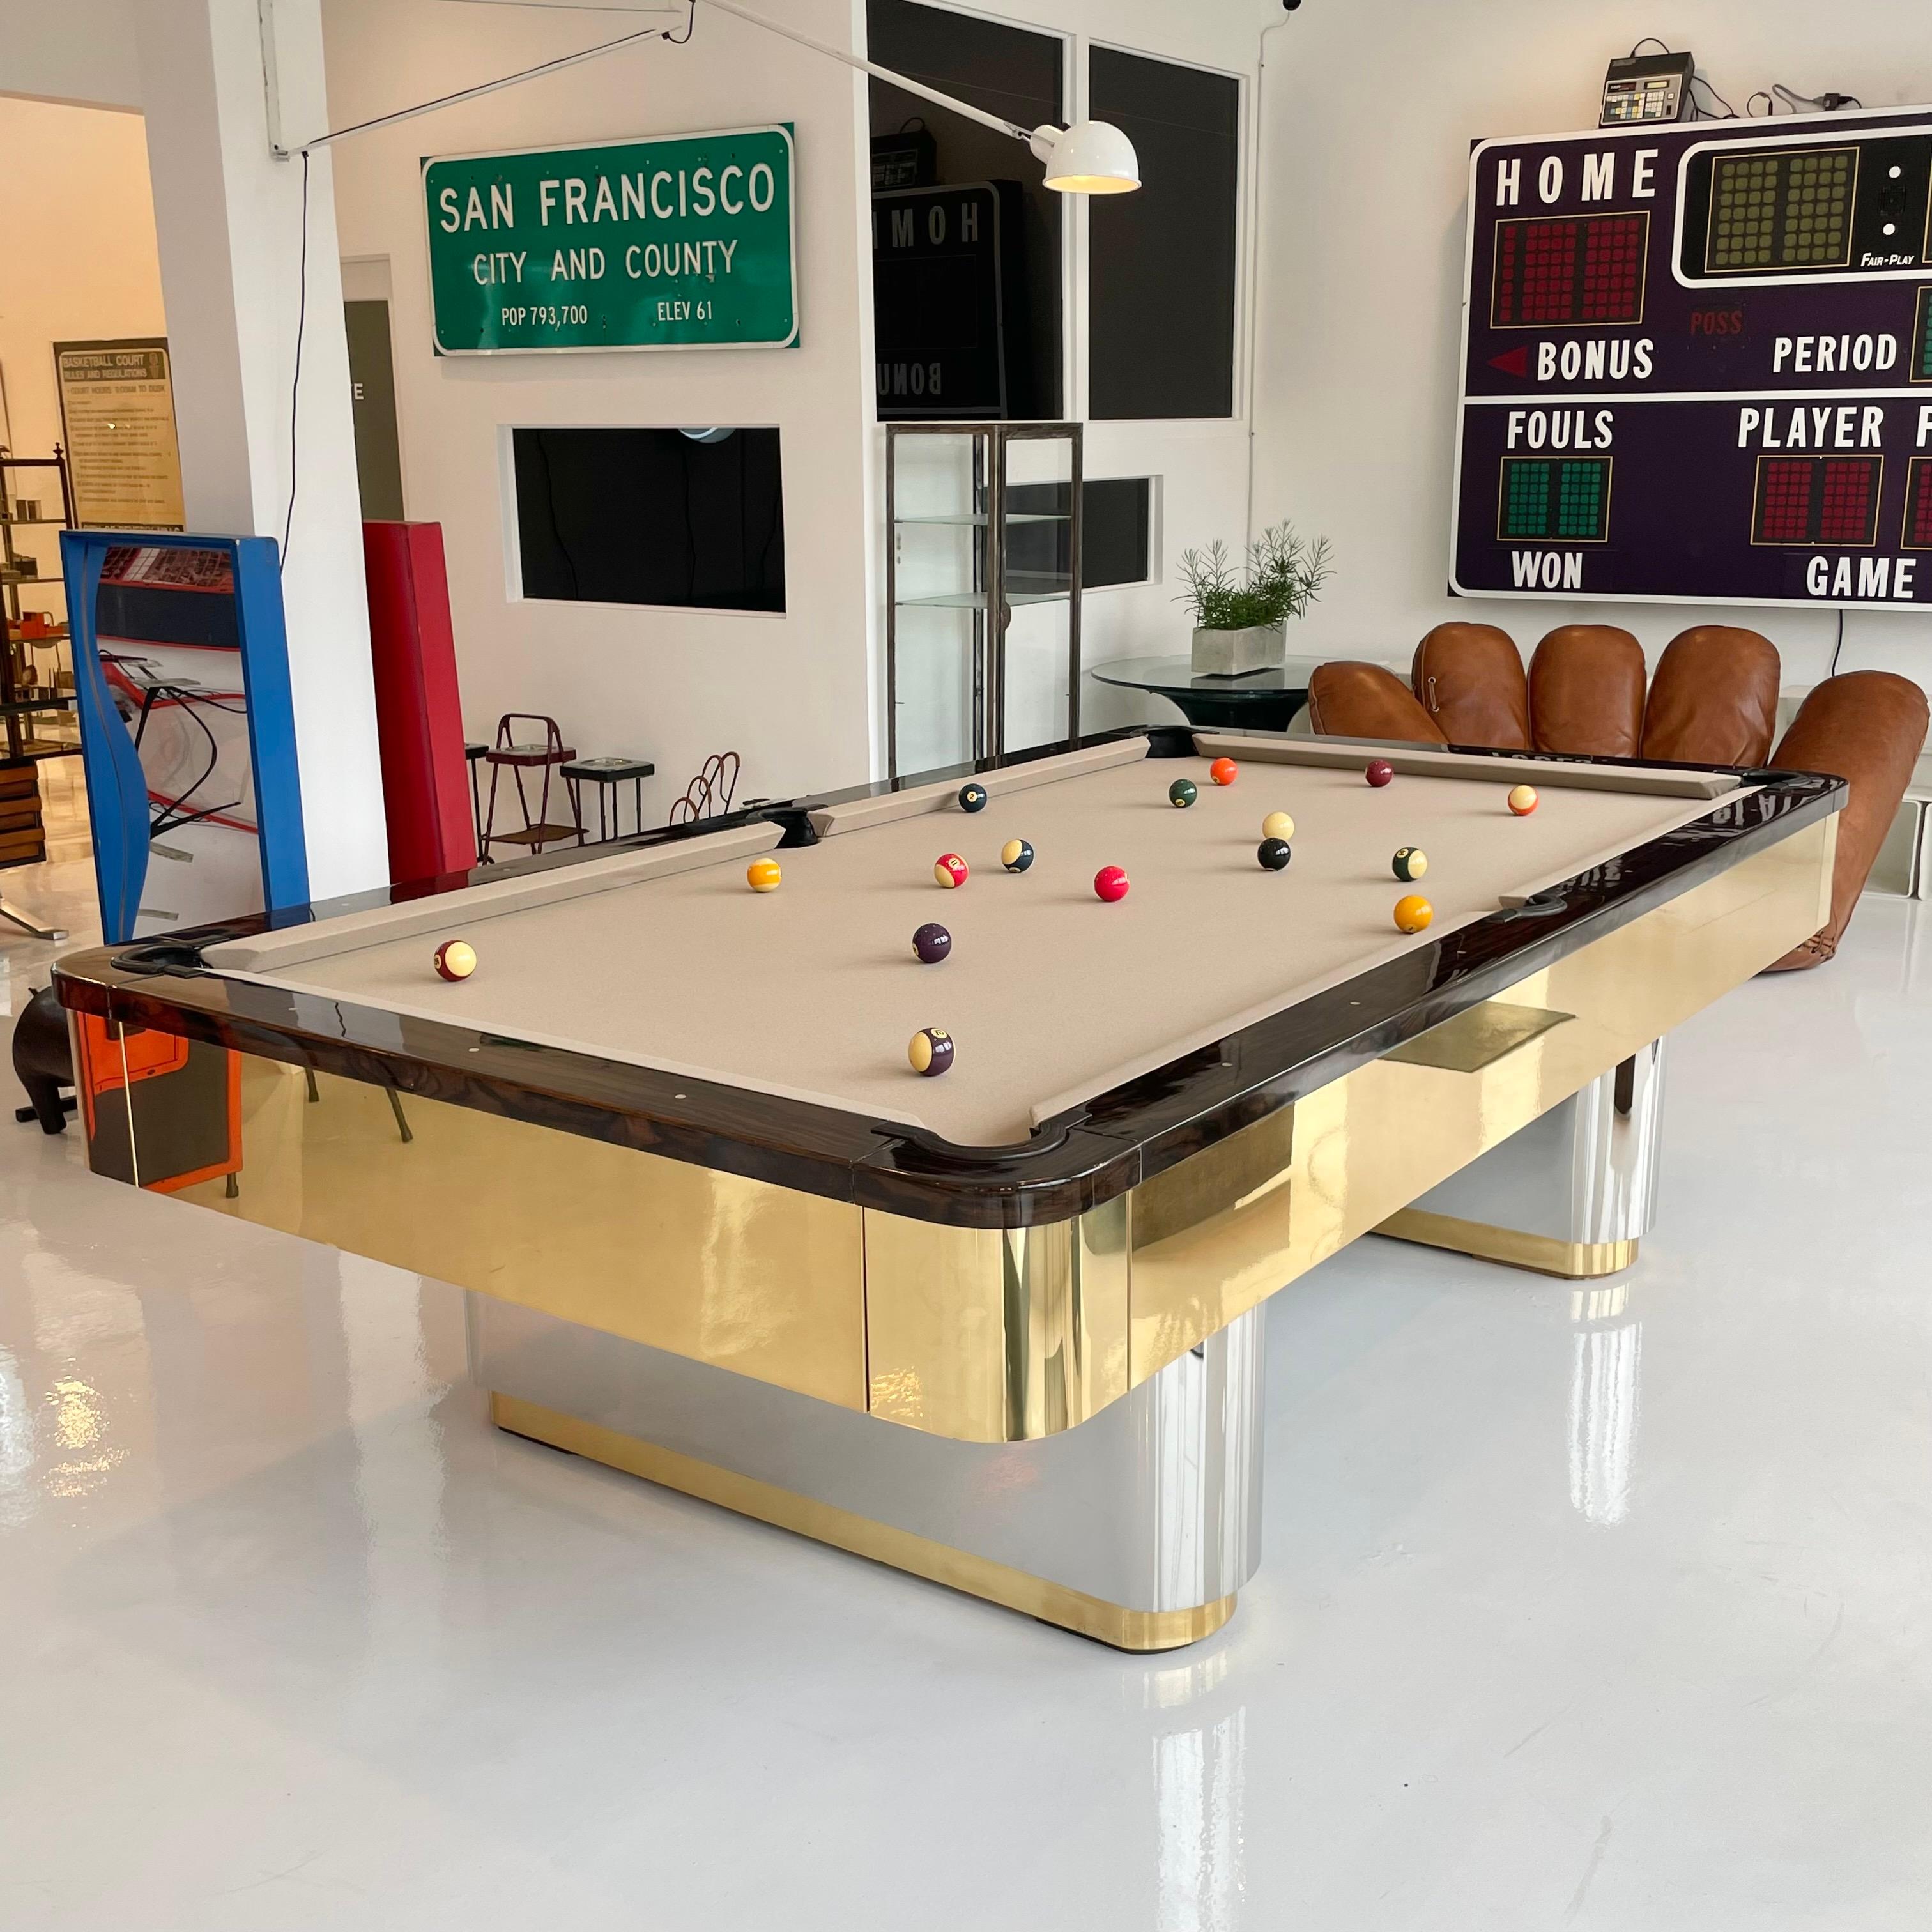 1970s Olhausen pool table. Professional sized 9 foot table. Chrome and brass pedestal bases with brass frame. Desirable 3 piece slate table. Each piece of the pool table has a serial number stamped on it. Comes with matching wall mounted cue holder,